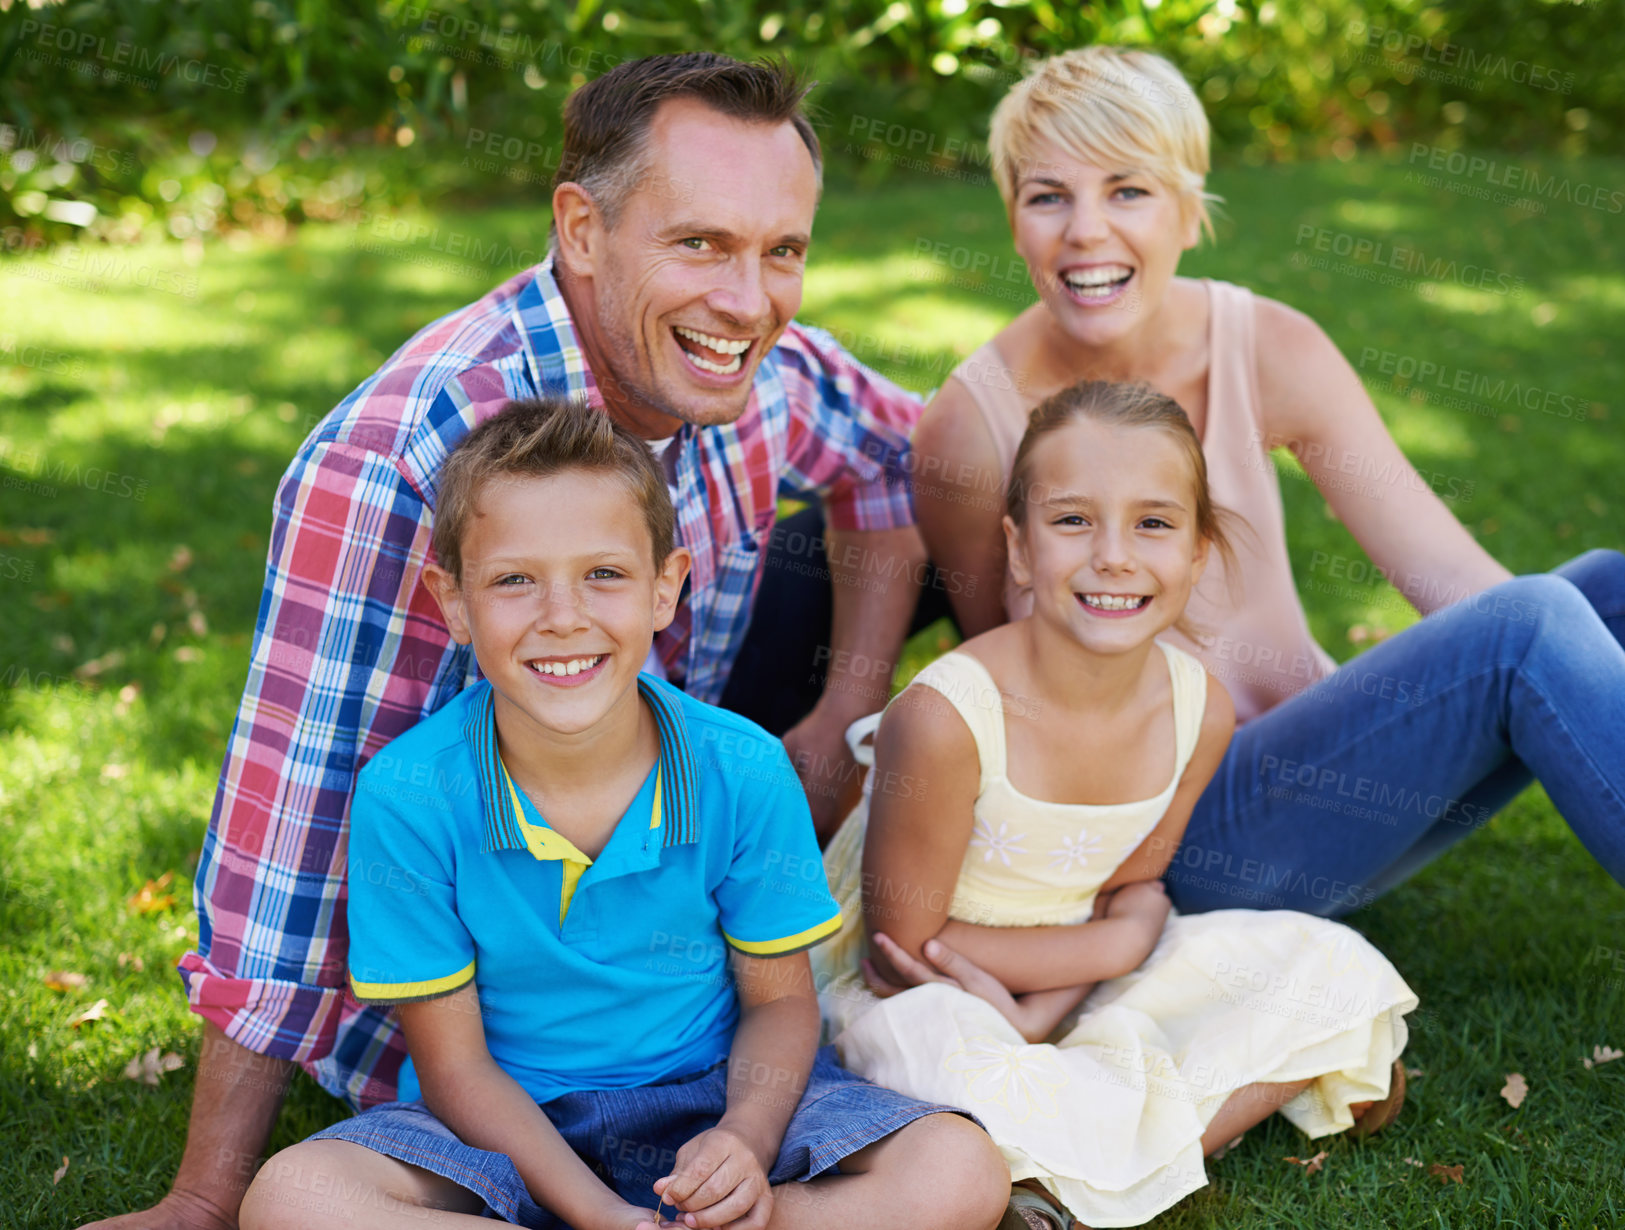 Buy stock photo Garden, grass and relax in portrait of happy family at home with care and love from parents for children. Mother, father and kids smile in backyard on holiday, vacation or together in summer on lawn